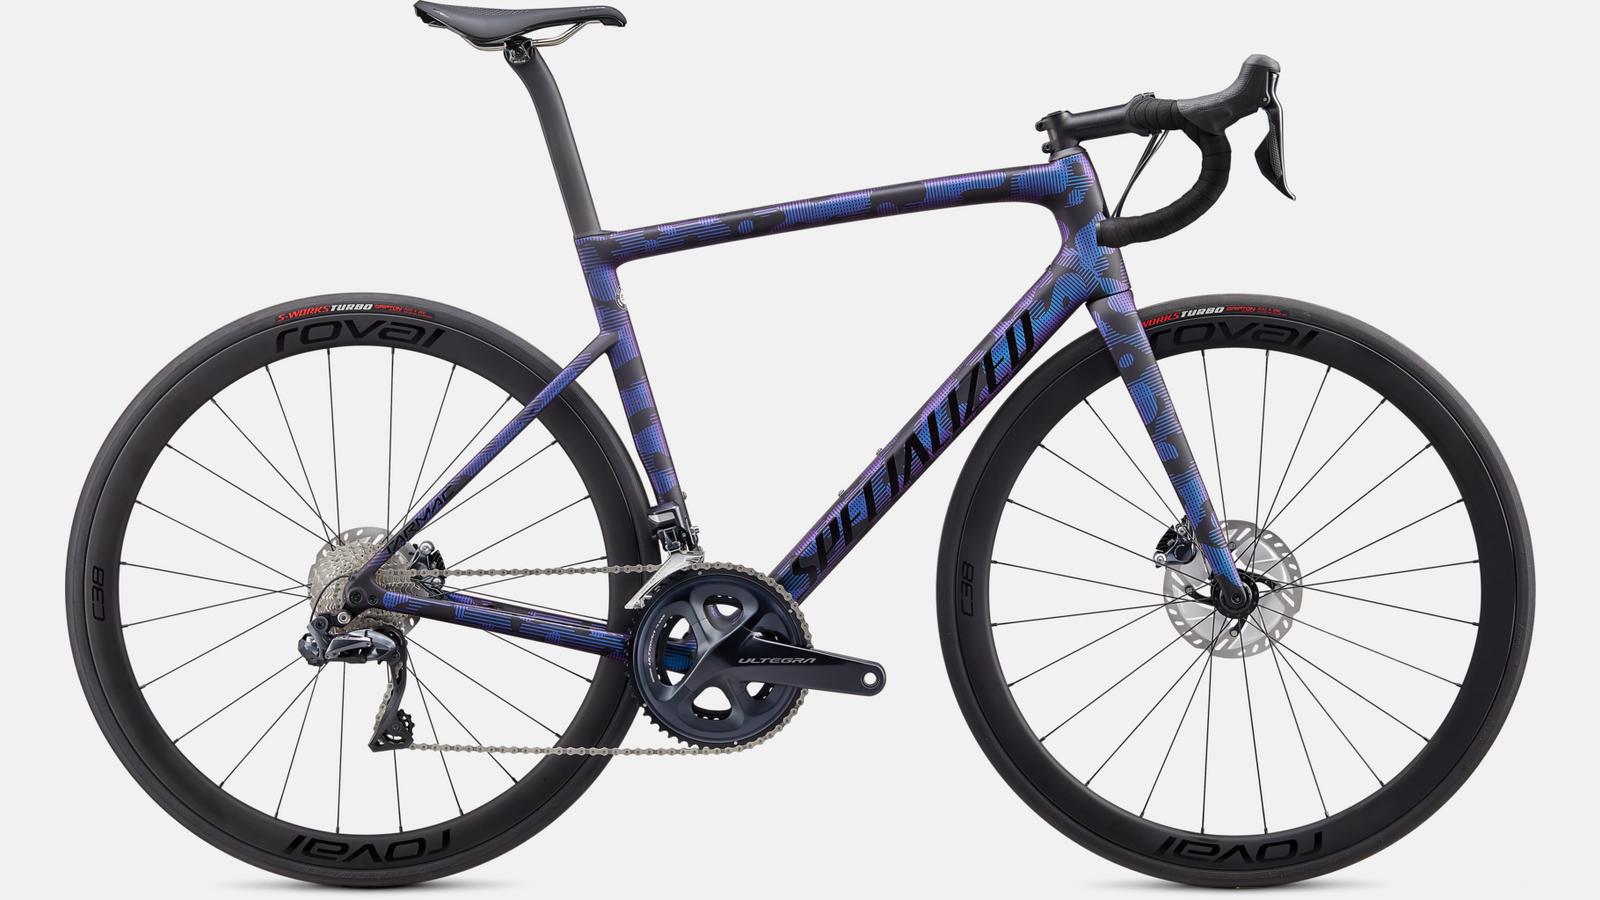 Paint for 2020 Specialized Tarmac SL6 Disc Expert - Satin Black